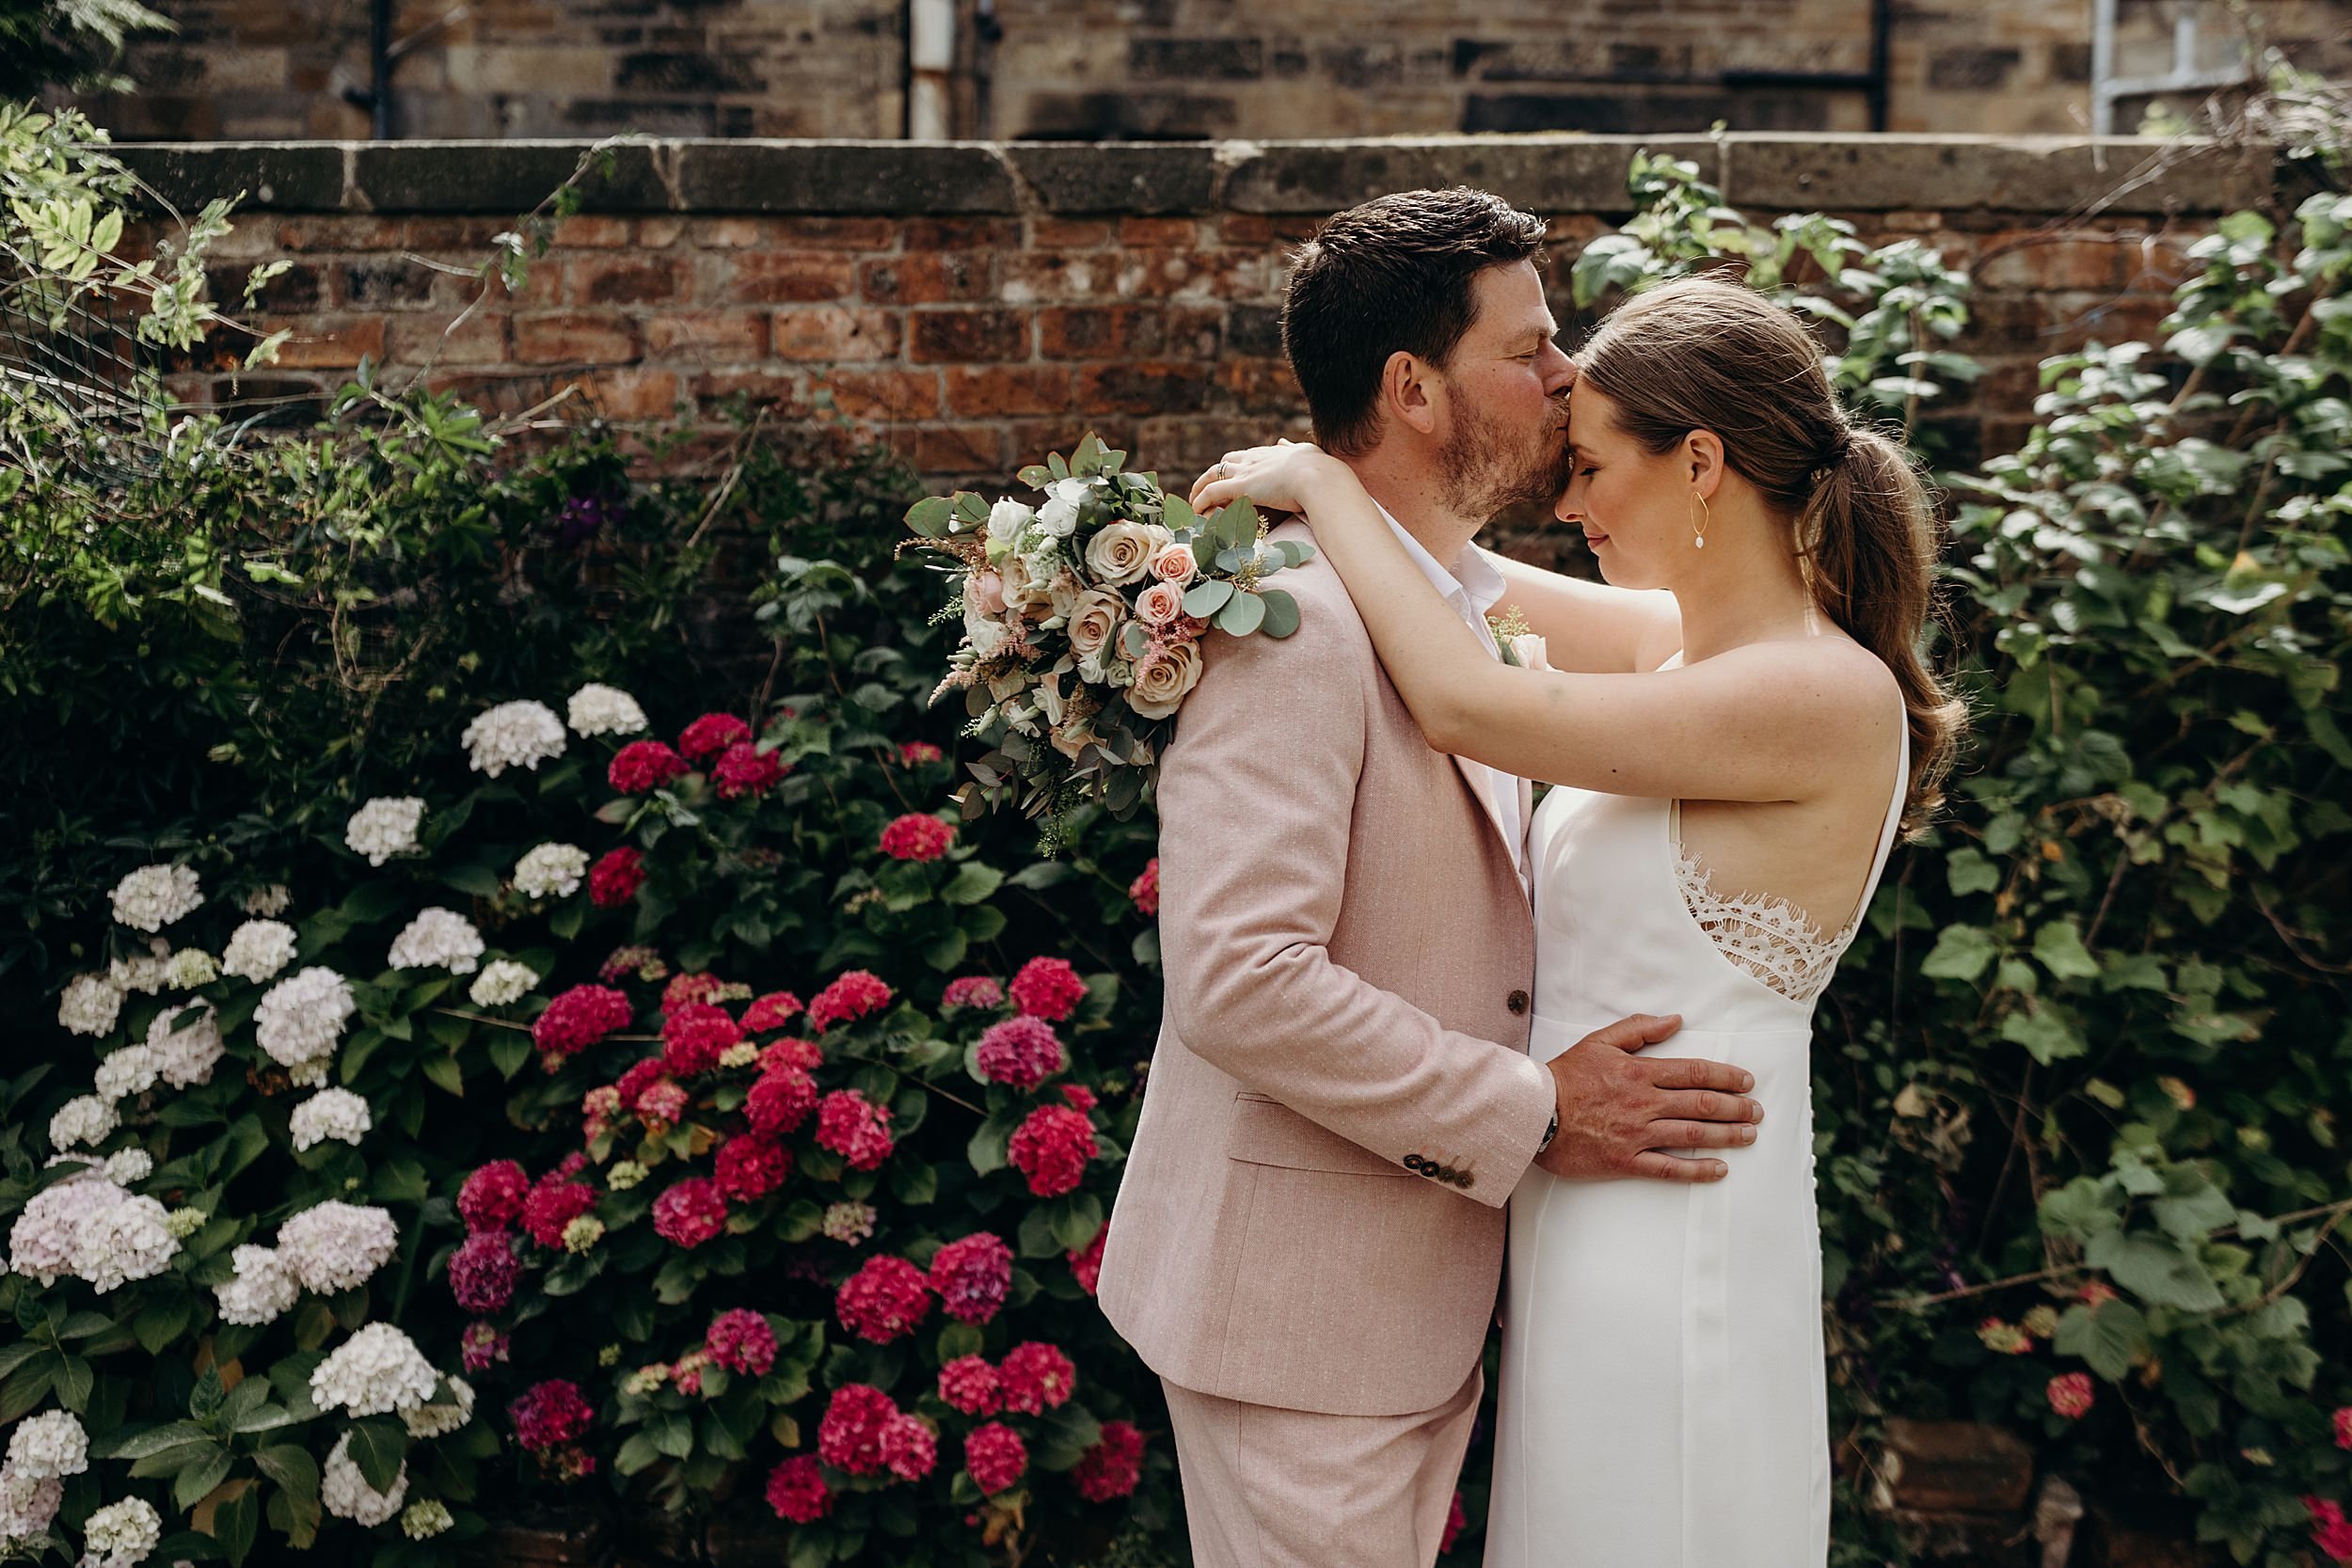 groom kissing brides forehead surrounded by flowers and rustic brick wall after micro wedding in the west end glasgow